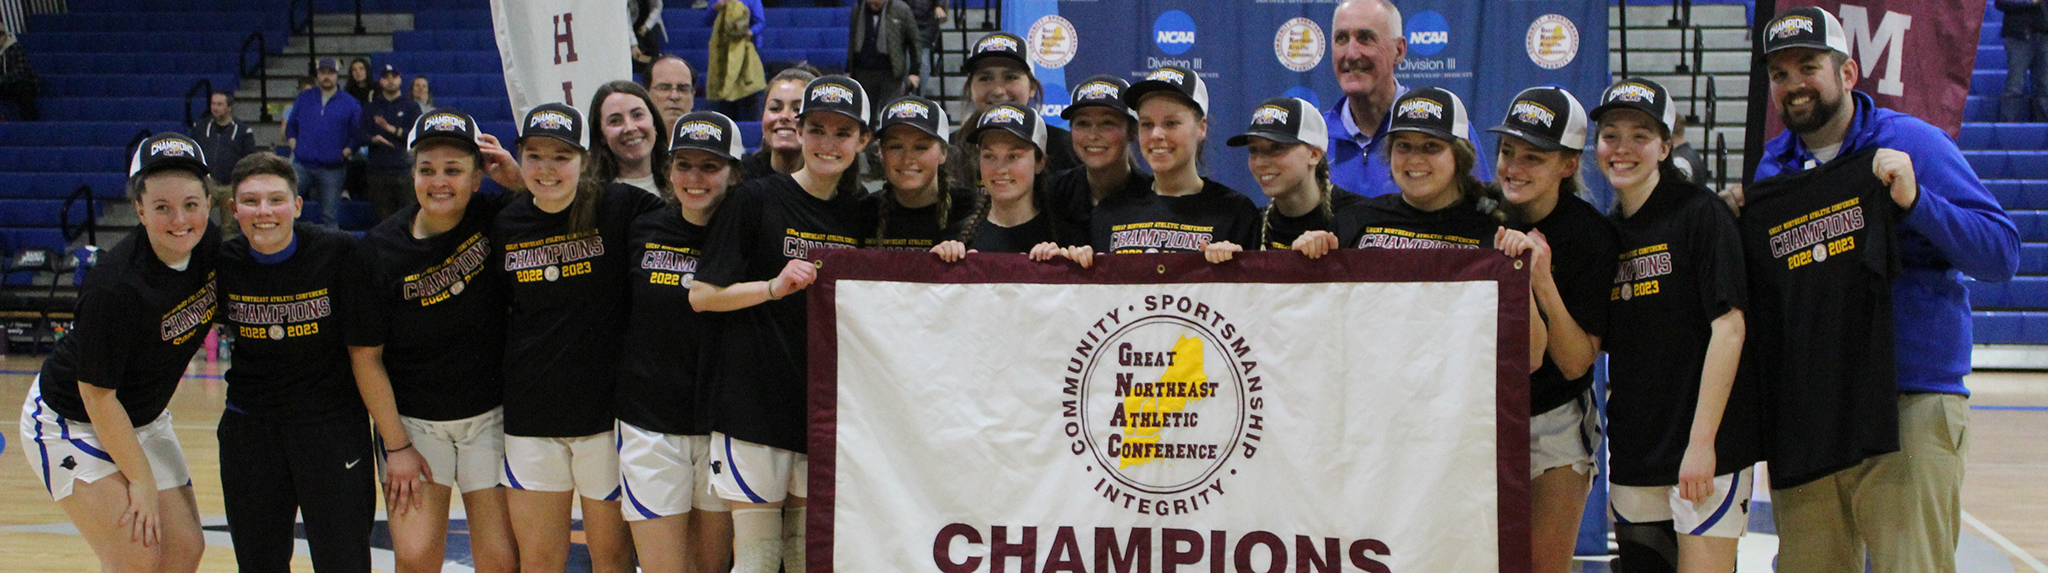 Women's basketball team win GNAC championship. Photo by Laurel Clace '25.